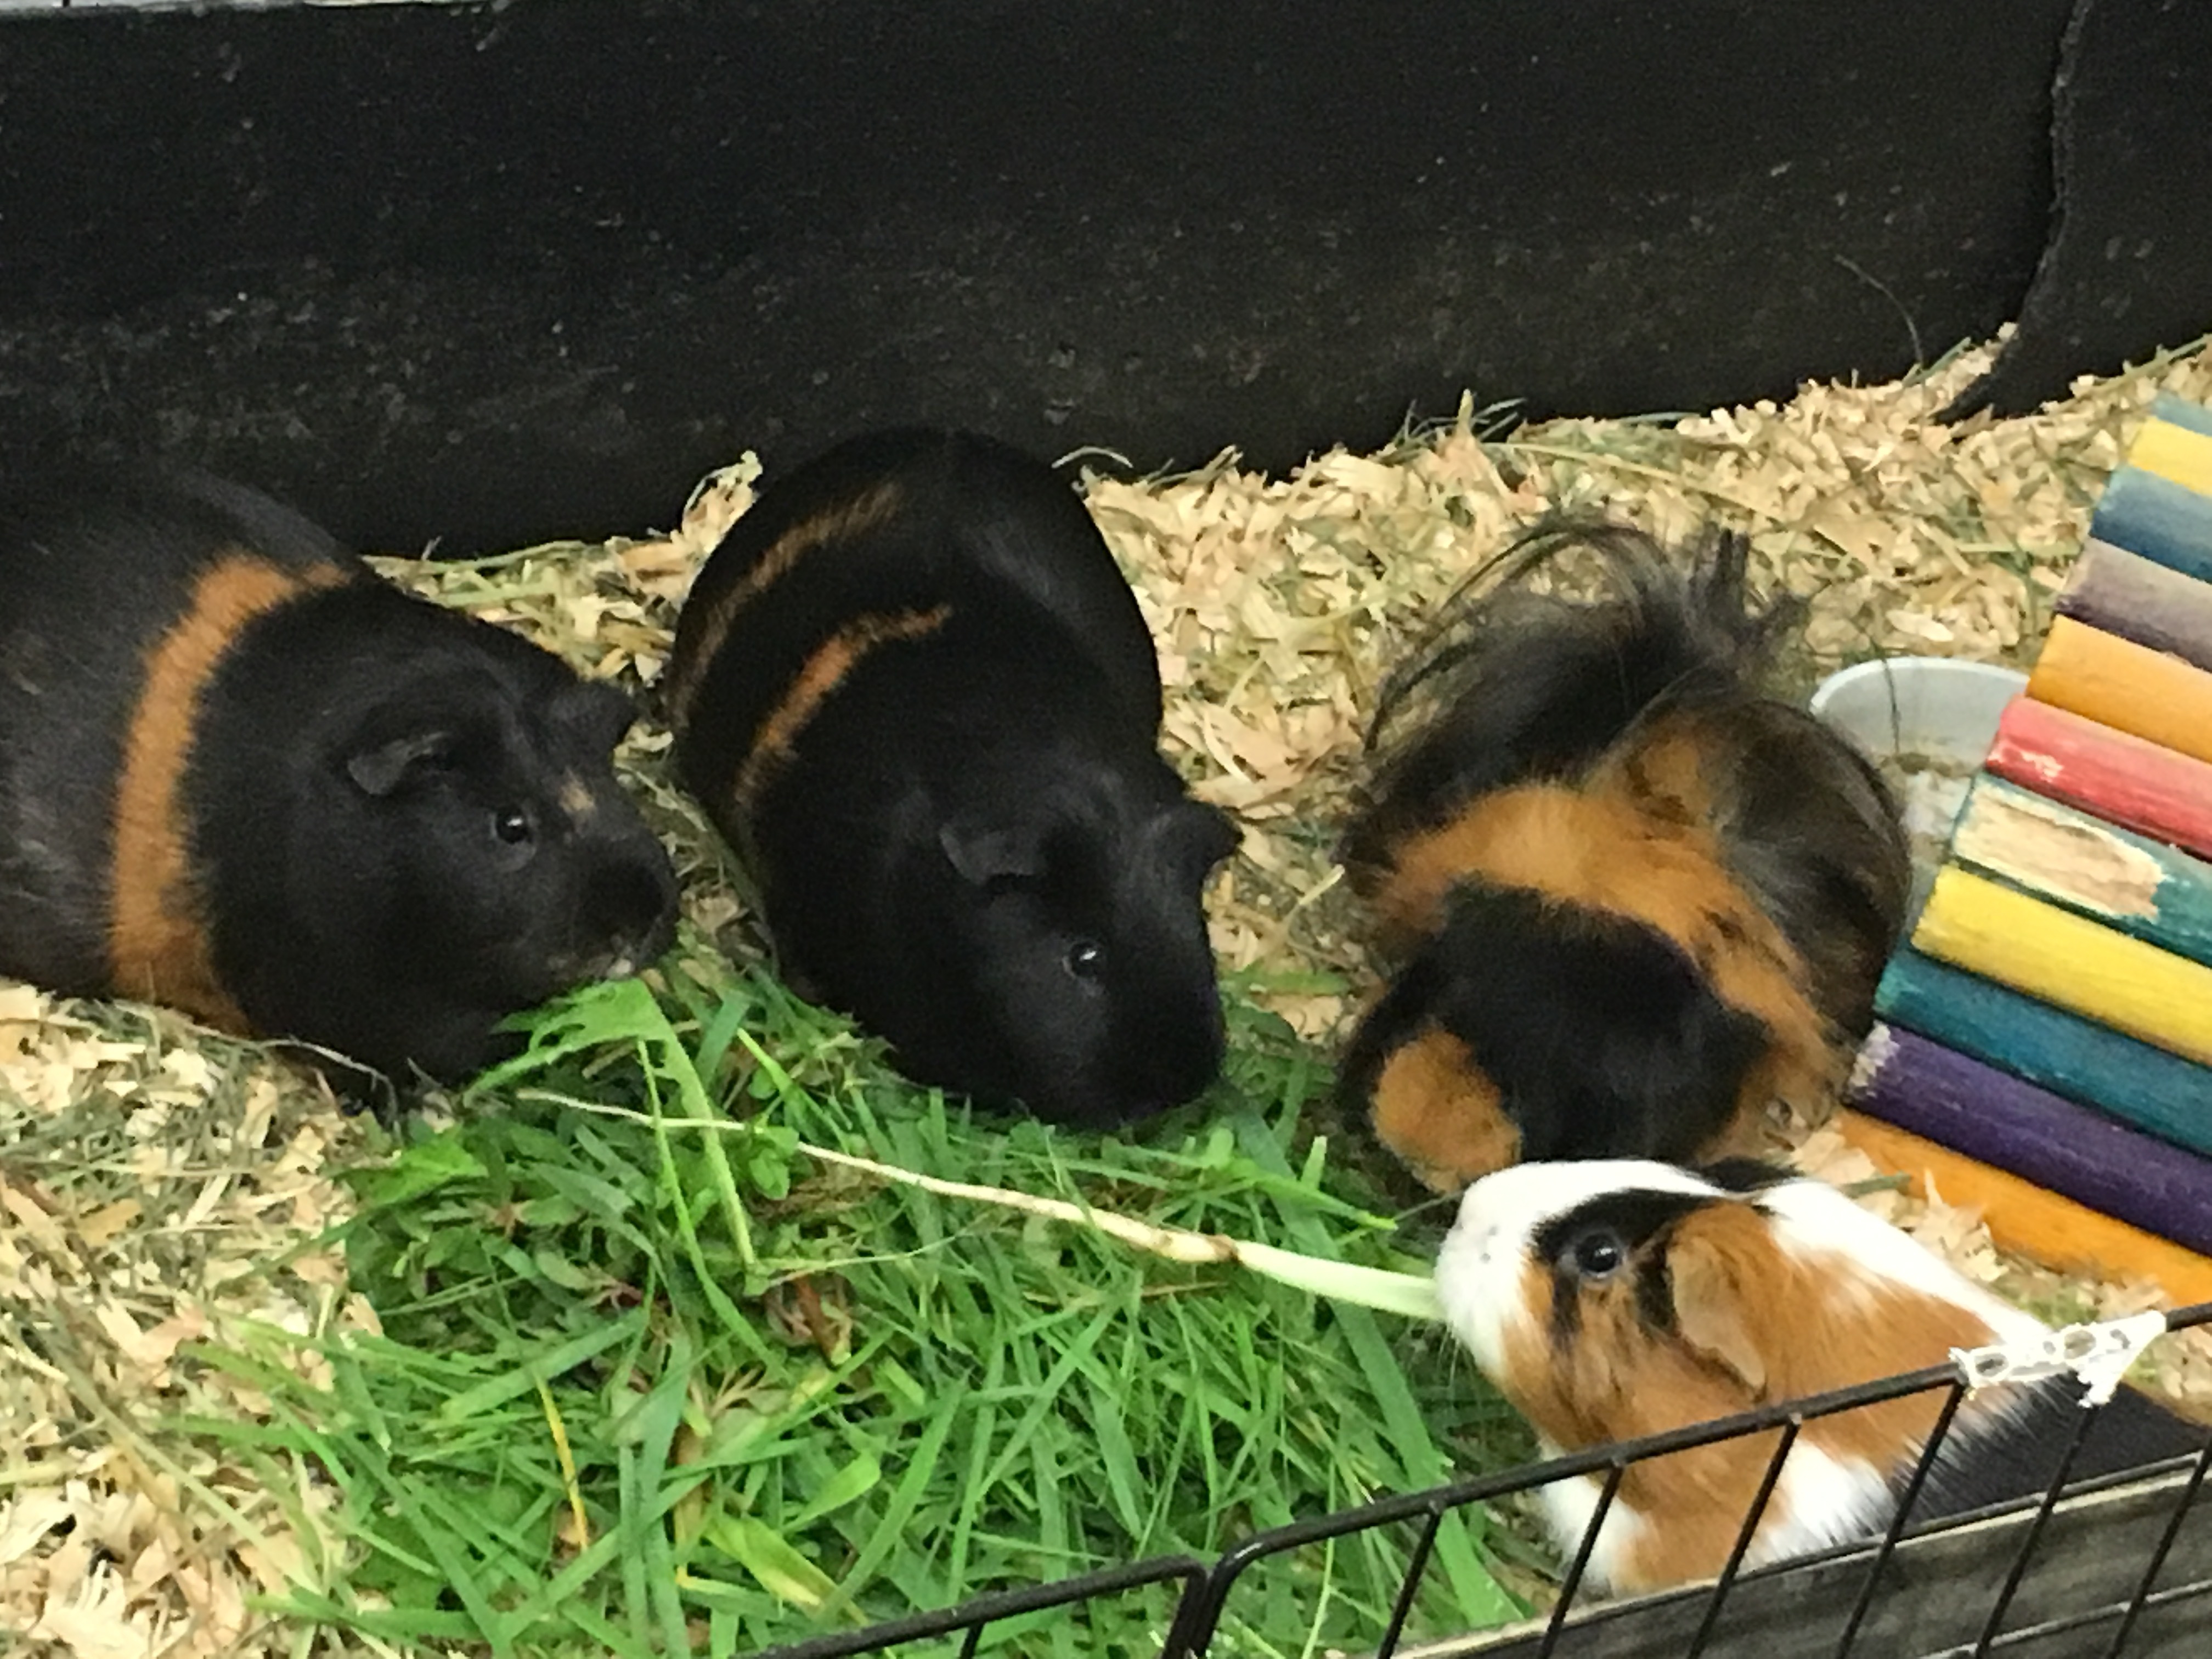 Anyone in greater Seattle area looking to adopt a sad Guinea pig